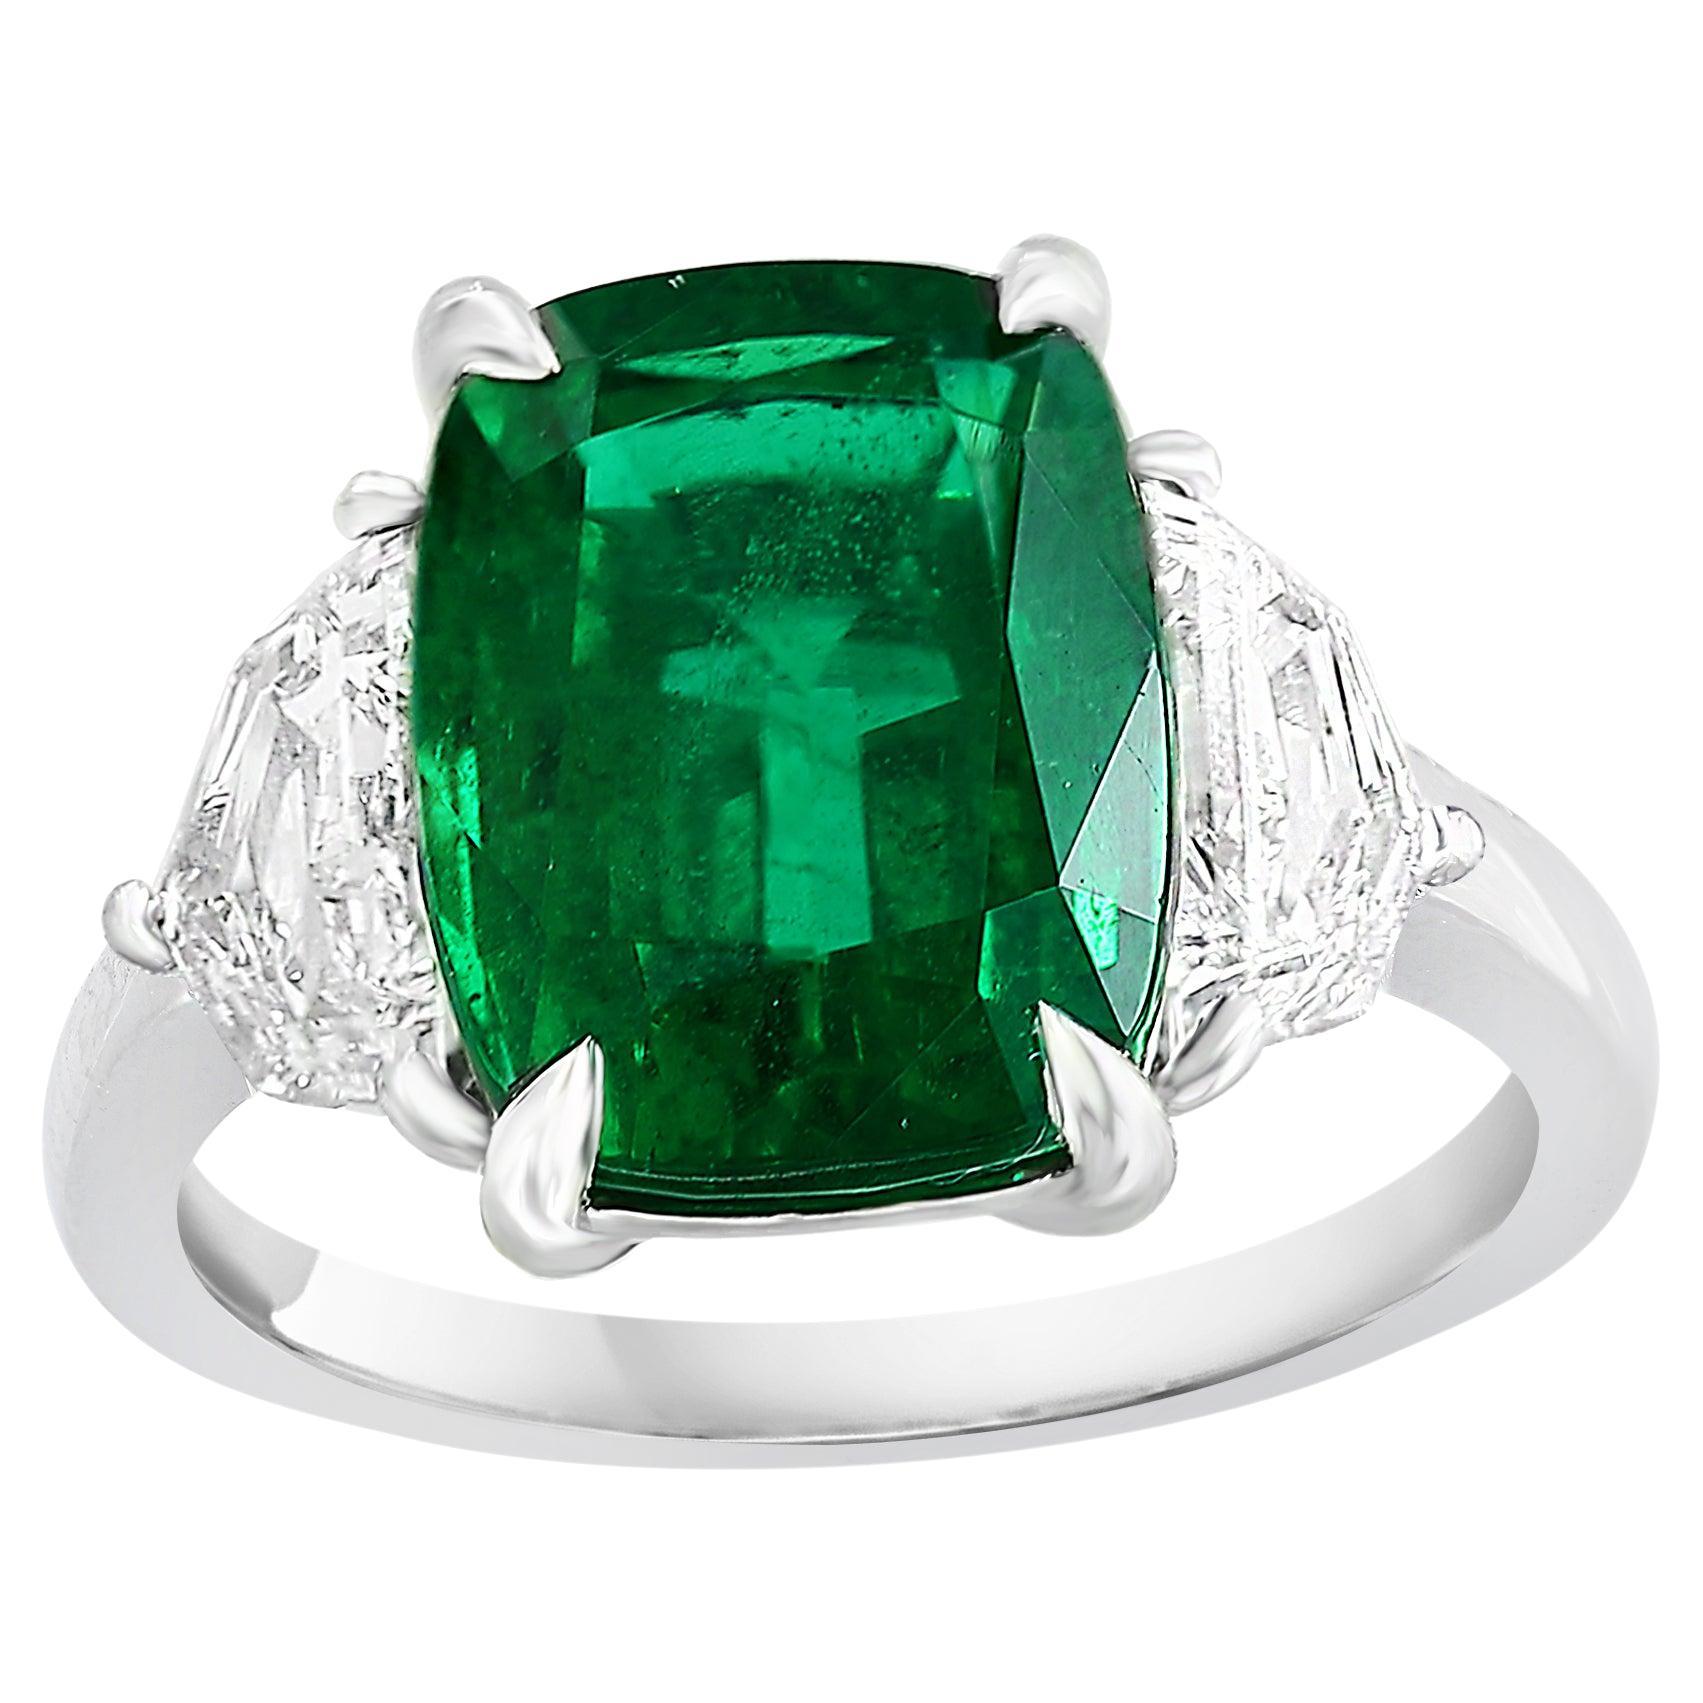 Certified 3.49 Carat Cushion Cut Emerald & Diamond Engagement Ring in Platinum For Sale